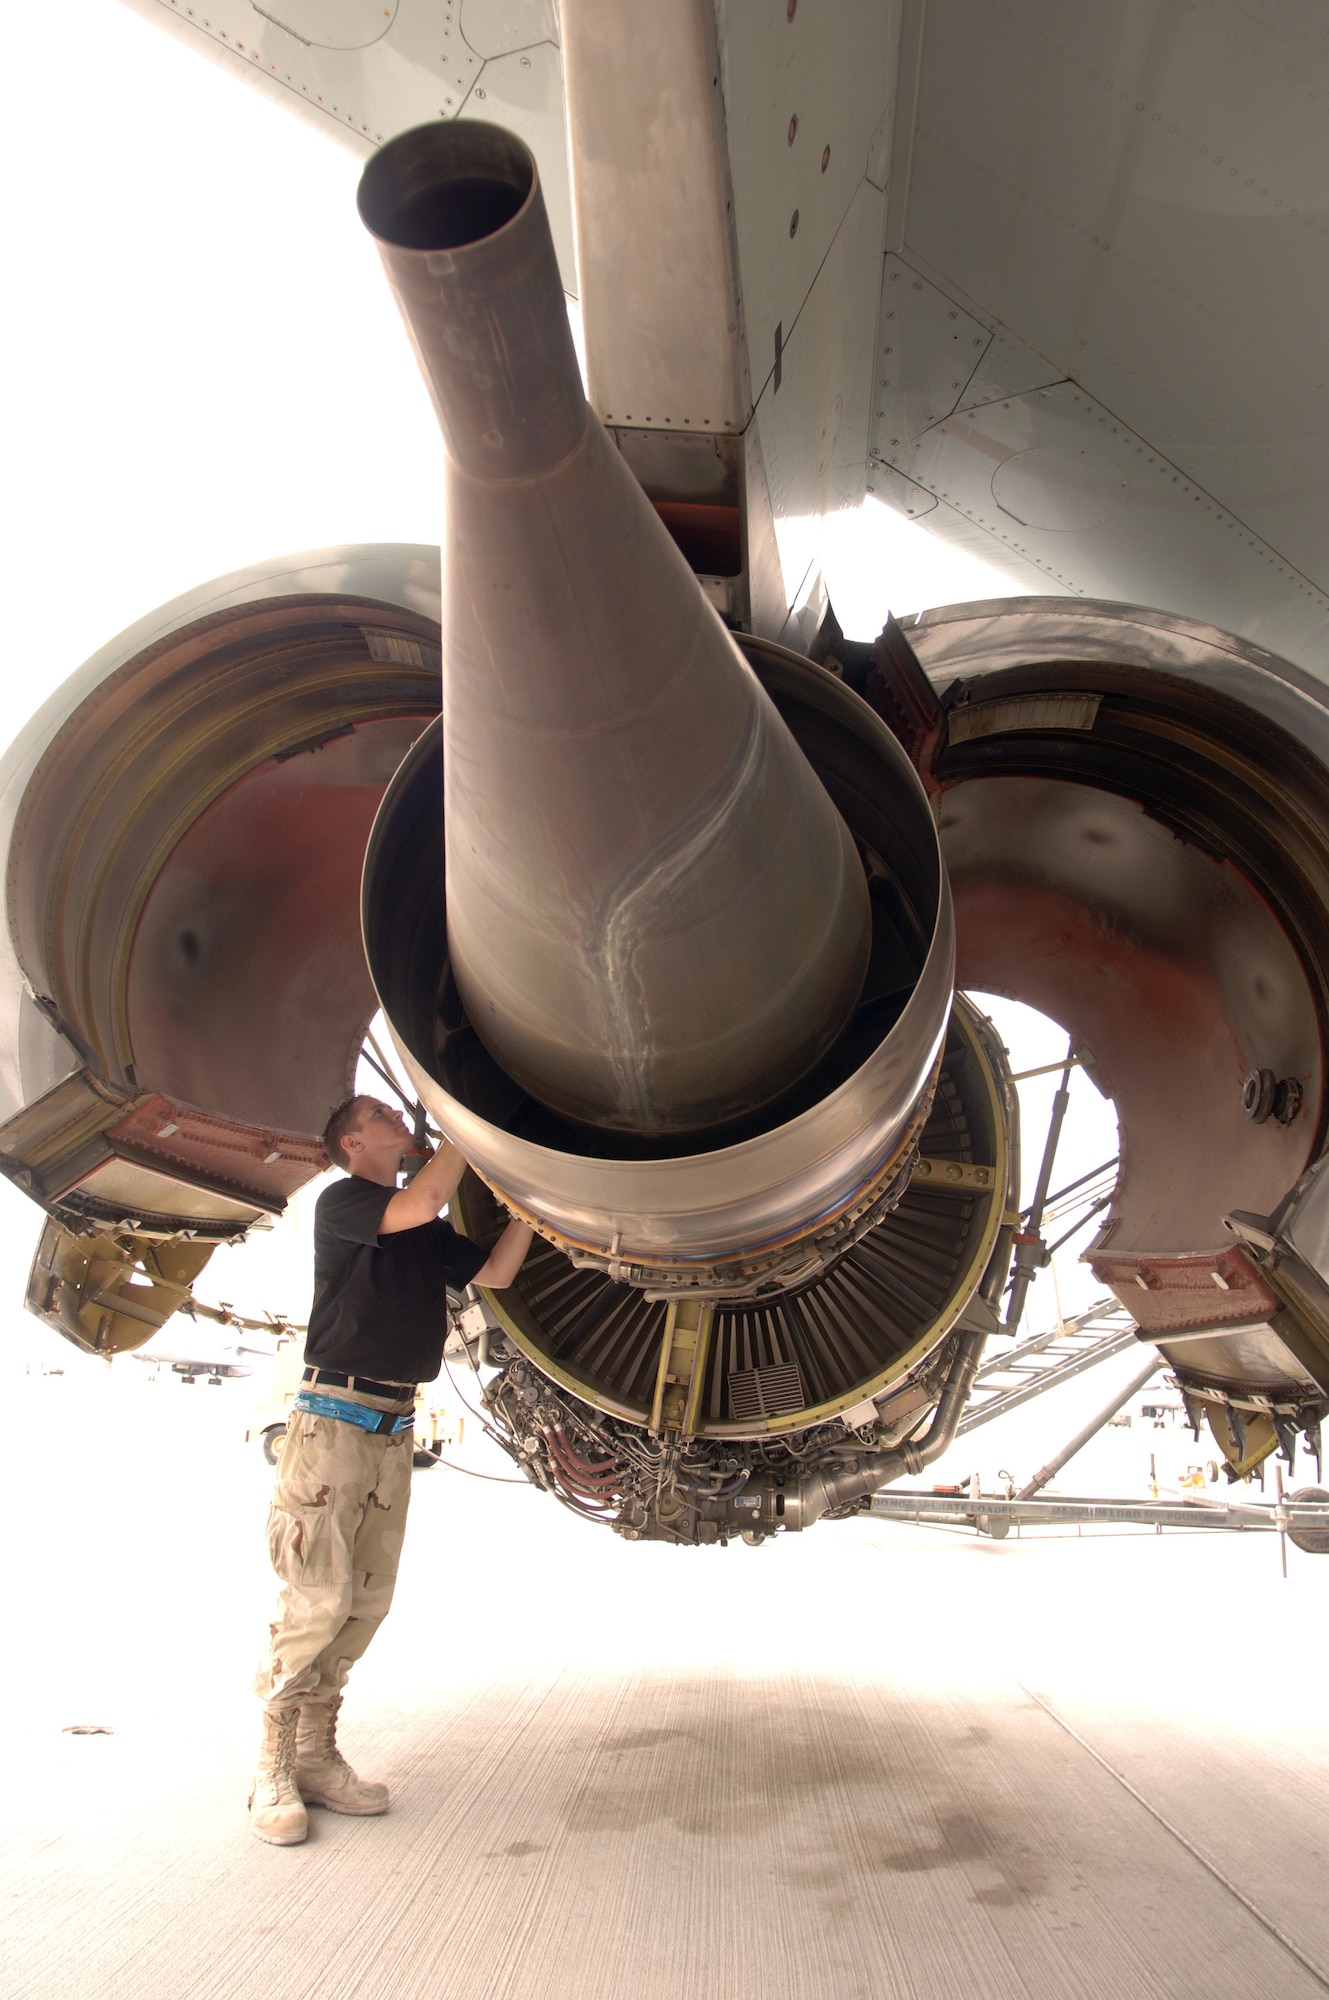 Airman Mark Magill inspects the number two engine on an RC-135 Rivet Joint in Southwest Asia. The F108-model high bypass turbofan engine, introduced to the 135-airframe in August of 1998, has proven to be a reliable workhorse in transporting the heavy 275,000-pound intelligence and reconnaissance platform. Airman Magill is a jet engine mechanic deployed from the 55th Aircraft Maintenance Squadron from Offutt Air Force Base, Neb. (U.S. Air Force photo/Master Sgt. Scott Wagers)
